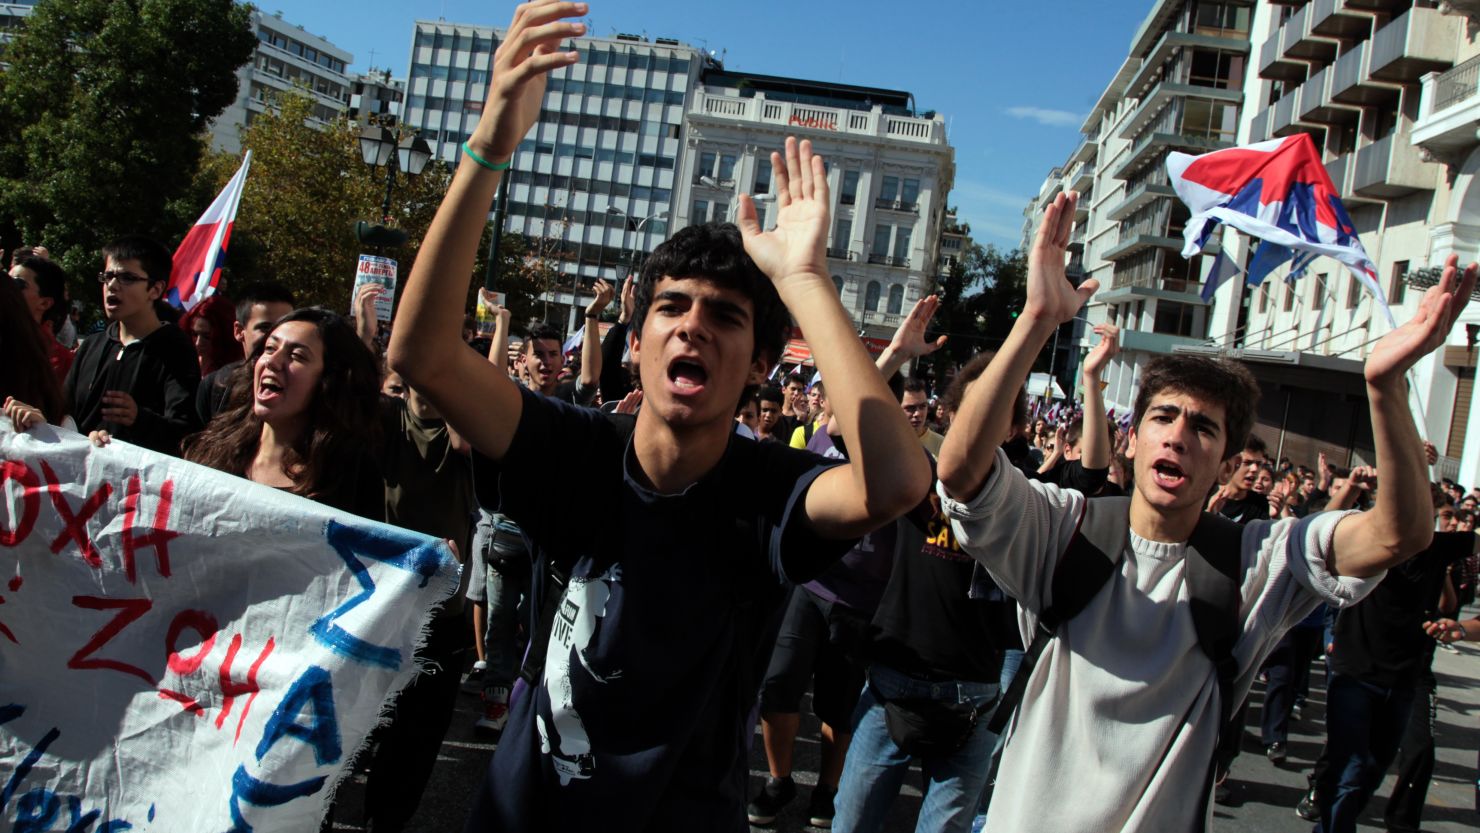 Demonstrators shout slogans Tuesday in front of the Greek parliament in Athens.